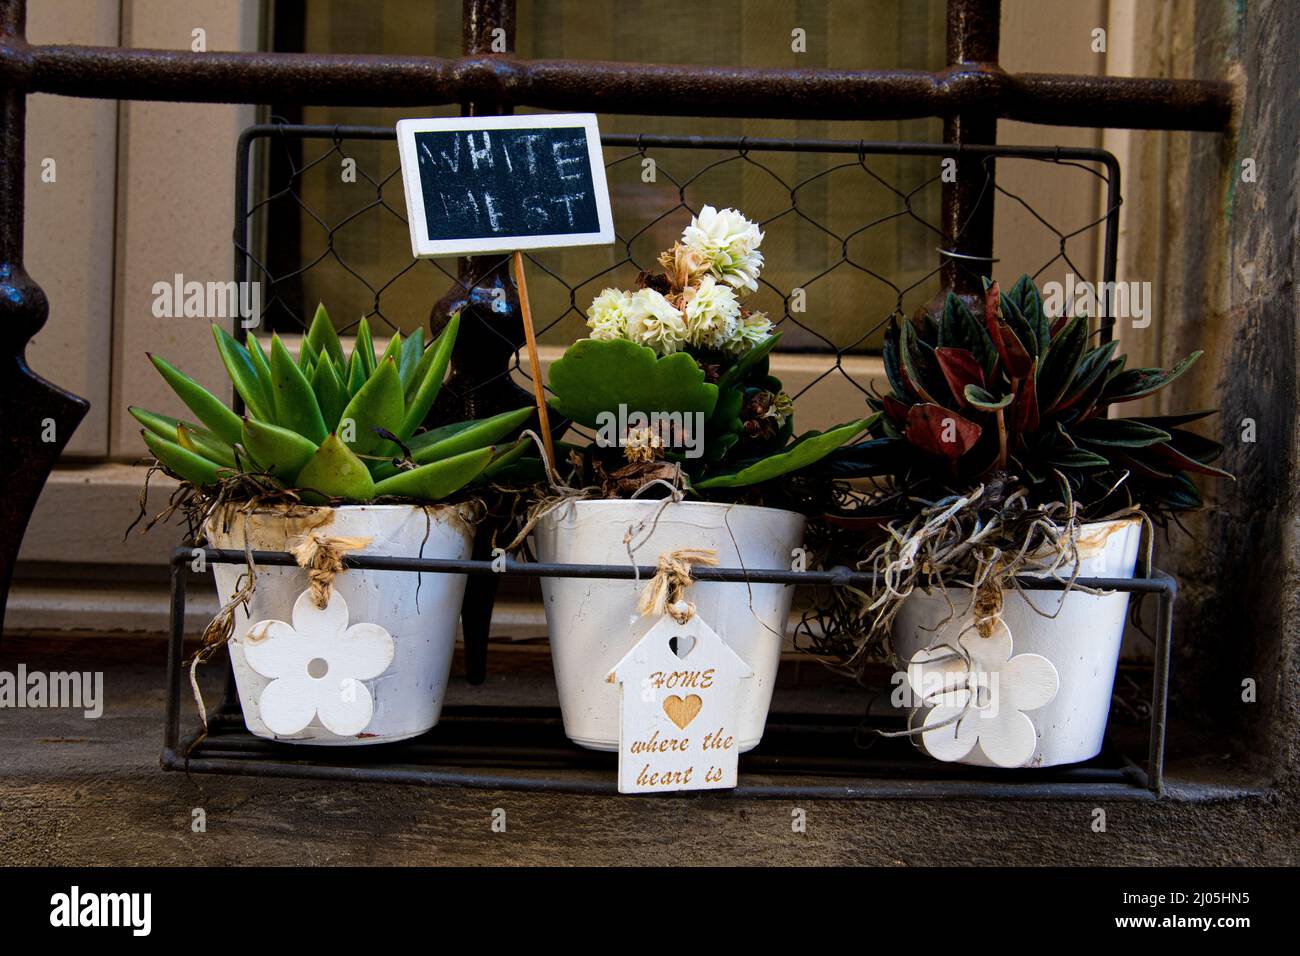 Variety of potted plants for sale at a store front window sill in Rome, Italy. Stock Photo